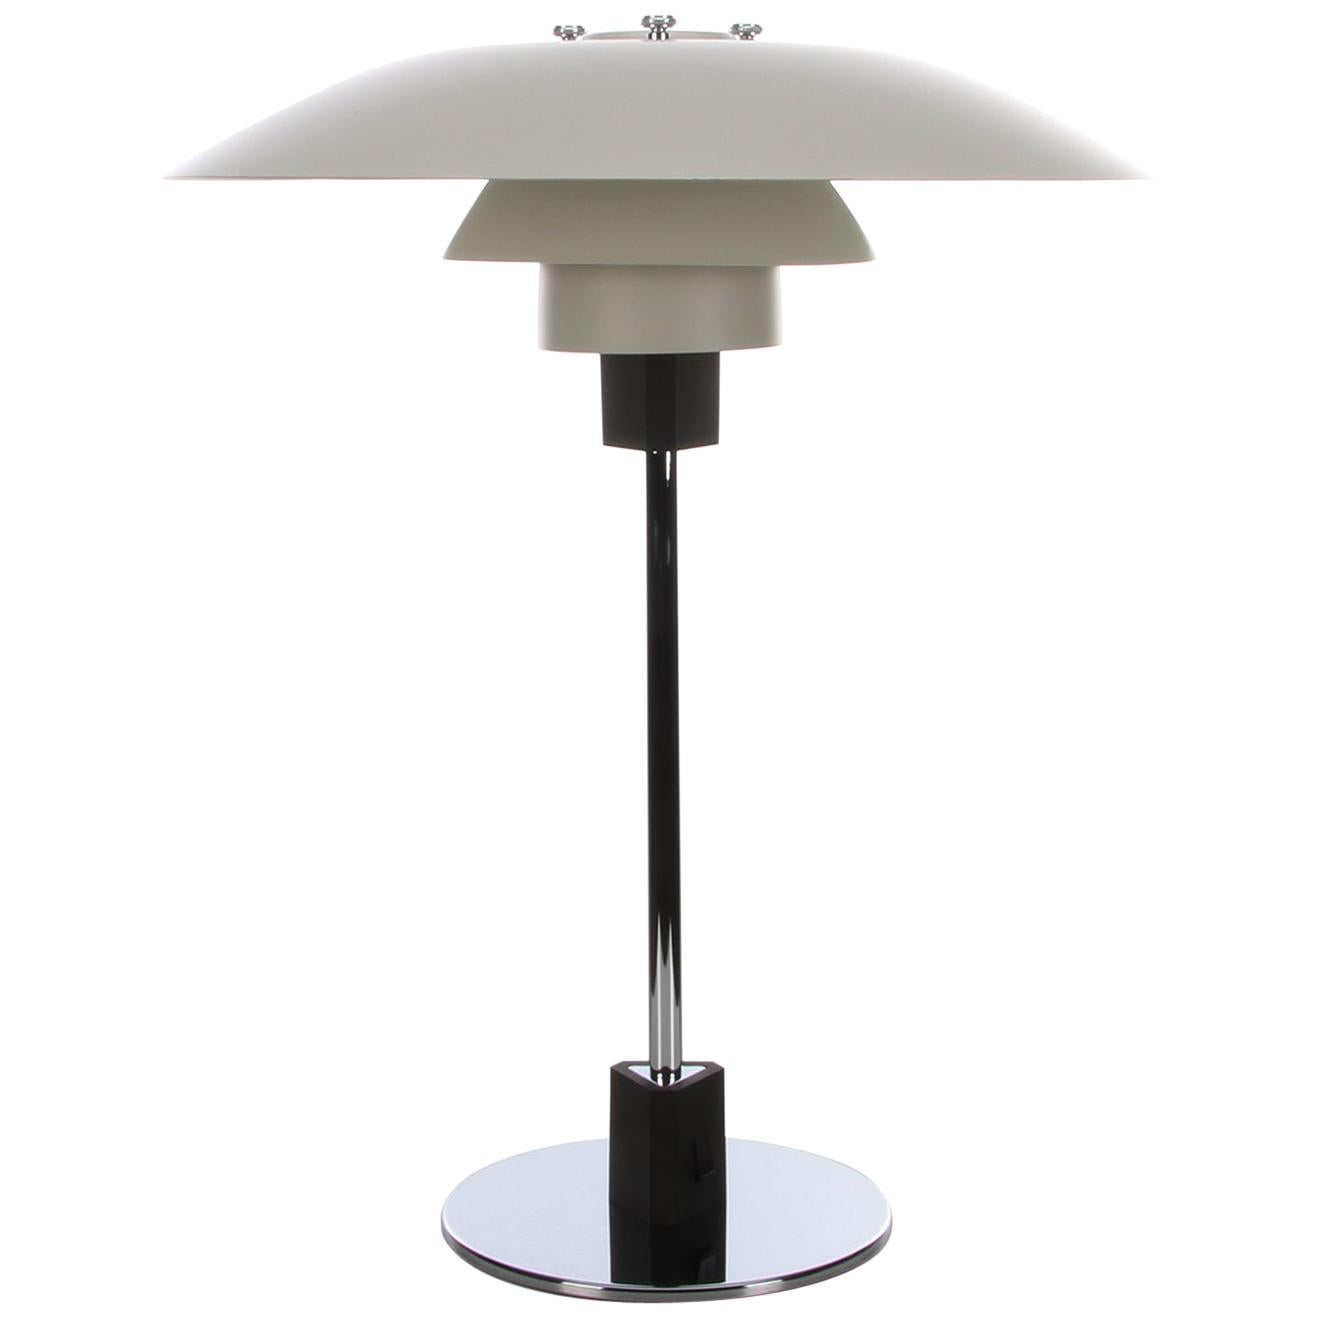 PH 4/3 Table Lamp by Poul Henningsen for Louis Poulsen in 1966